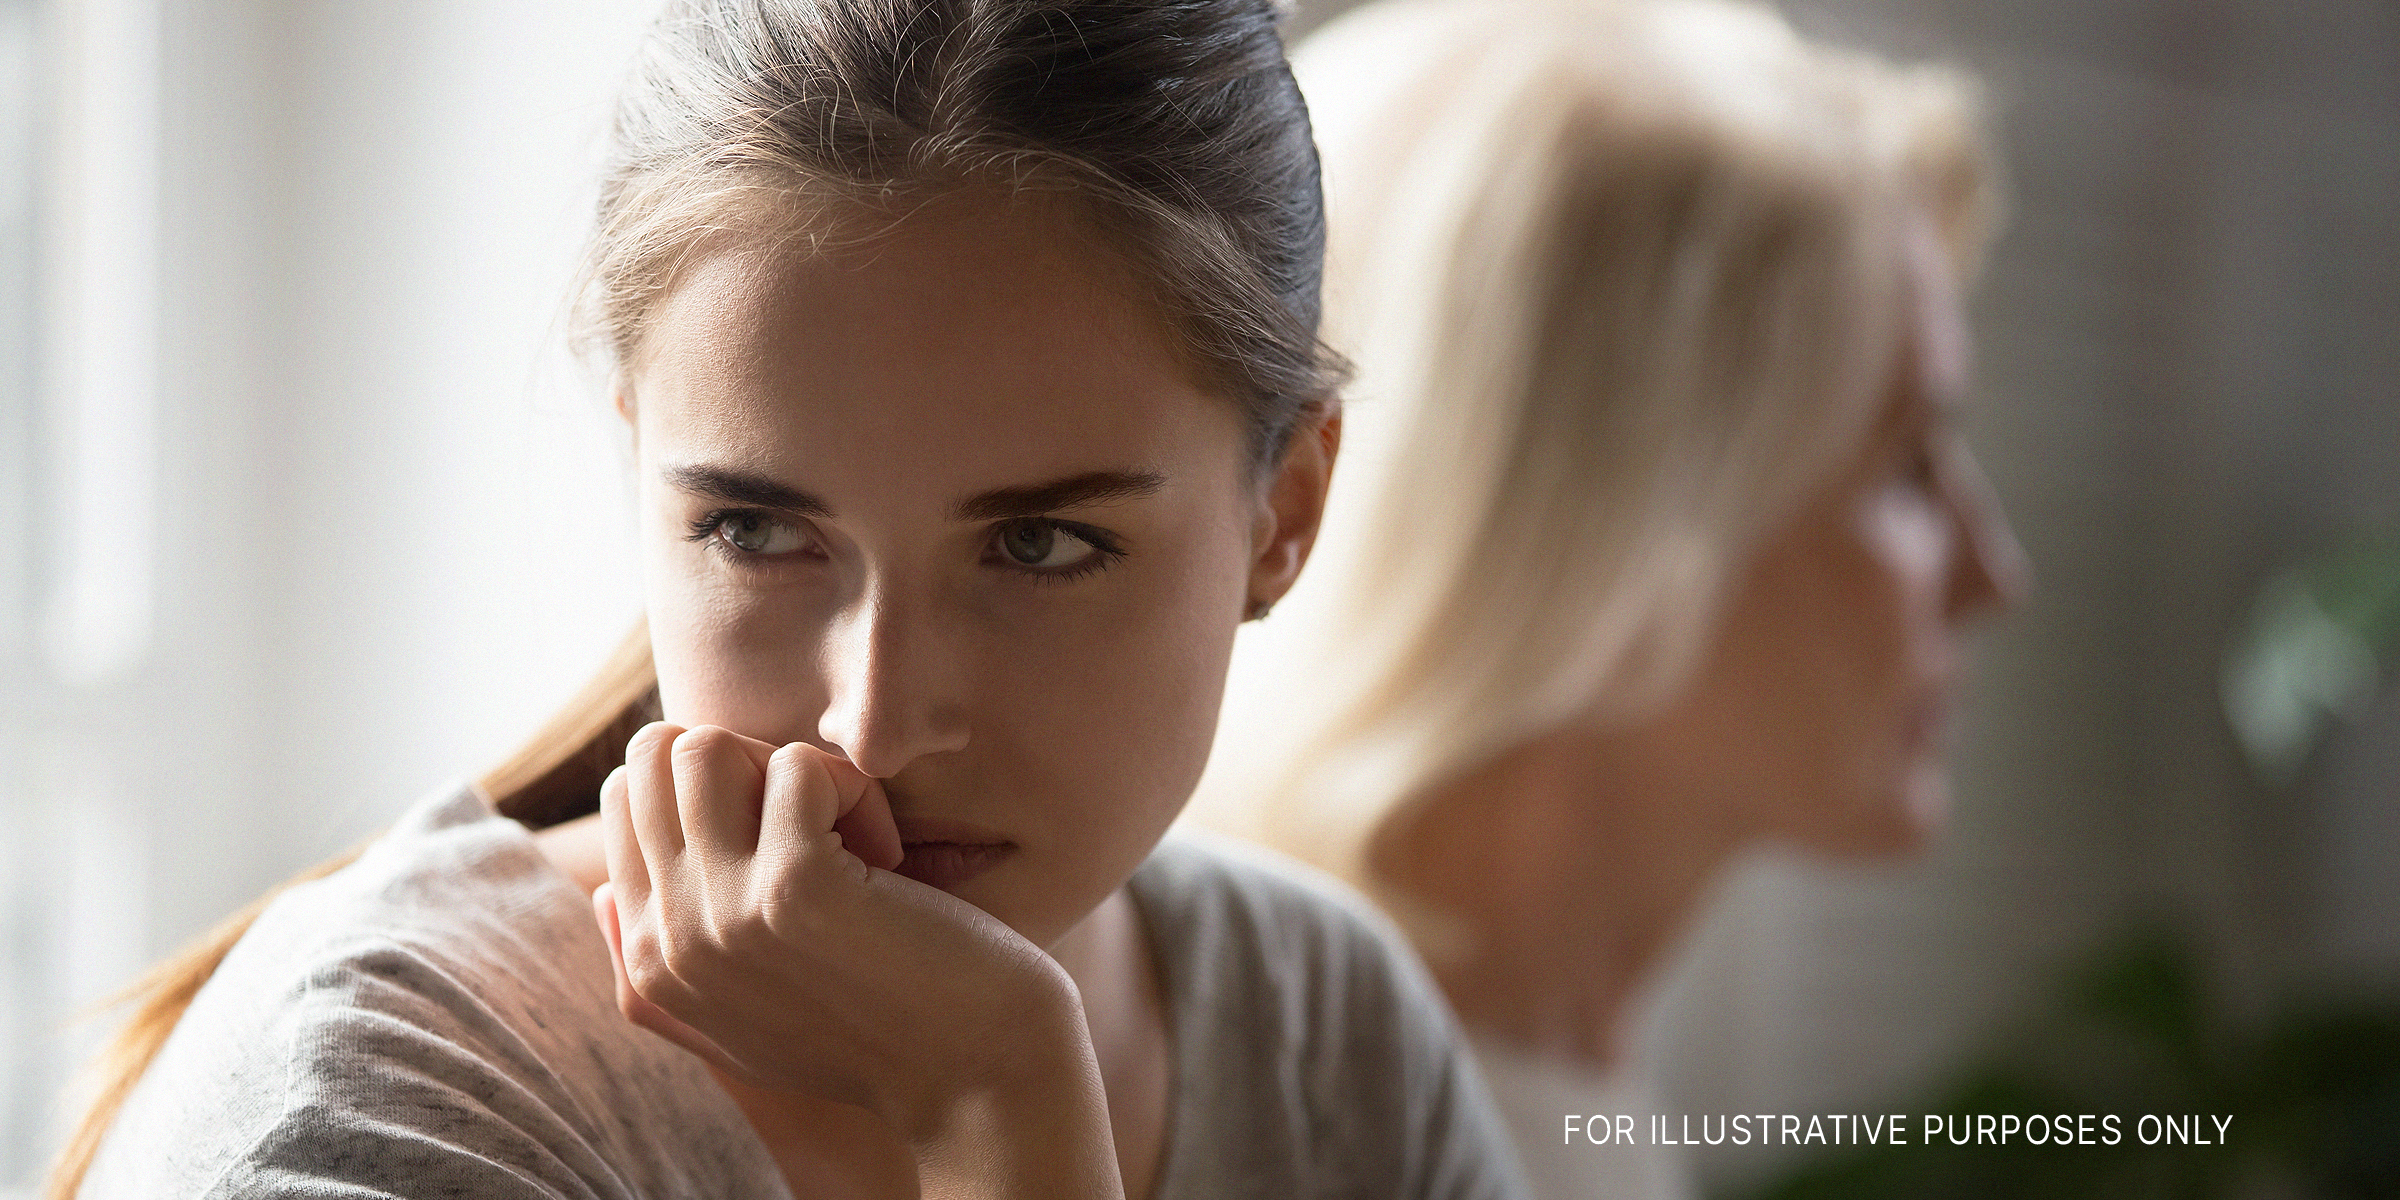 An upset young woman looking way from an older one in the background | Source: Shutterstock